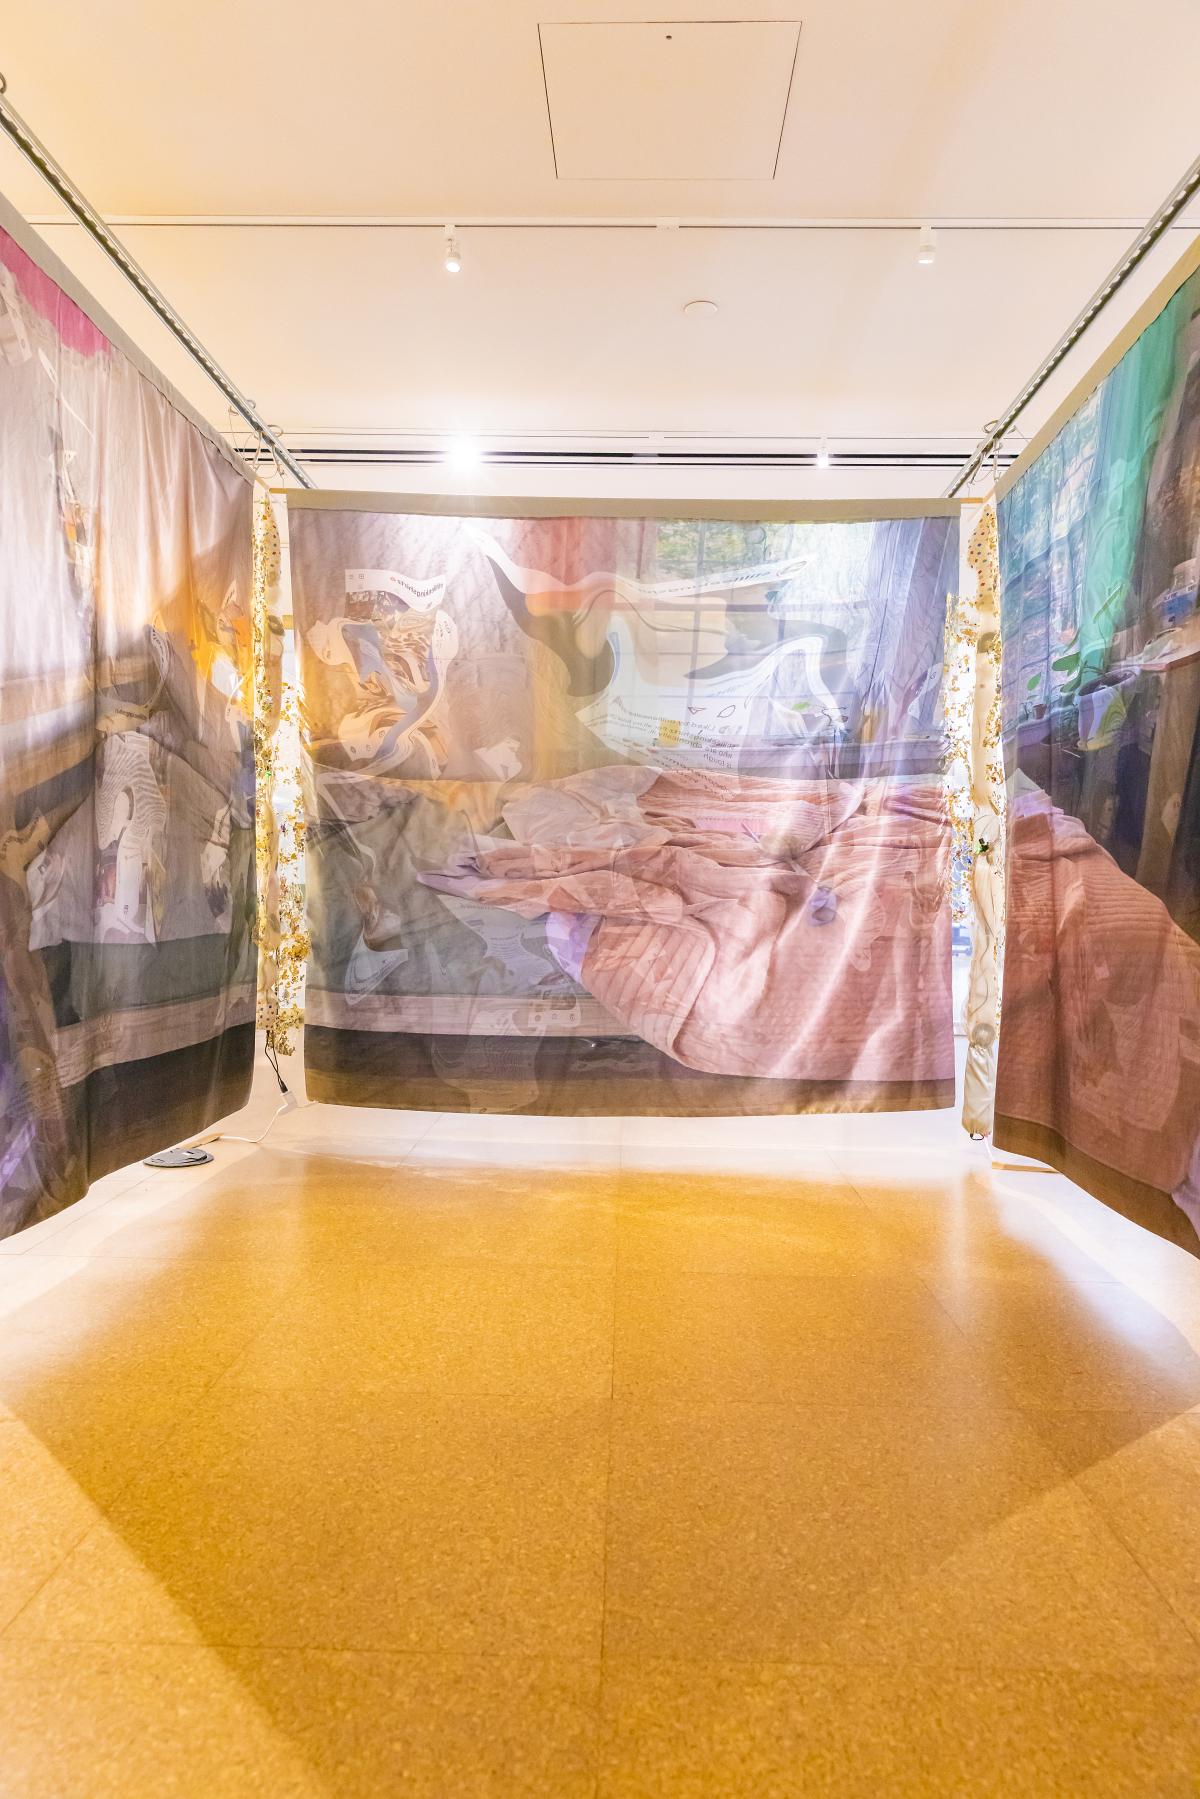 Art installation as viewed from head on, showing the main center panel and the display of the artists' bed.